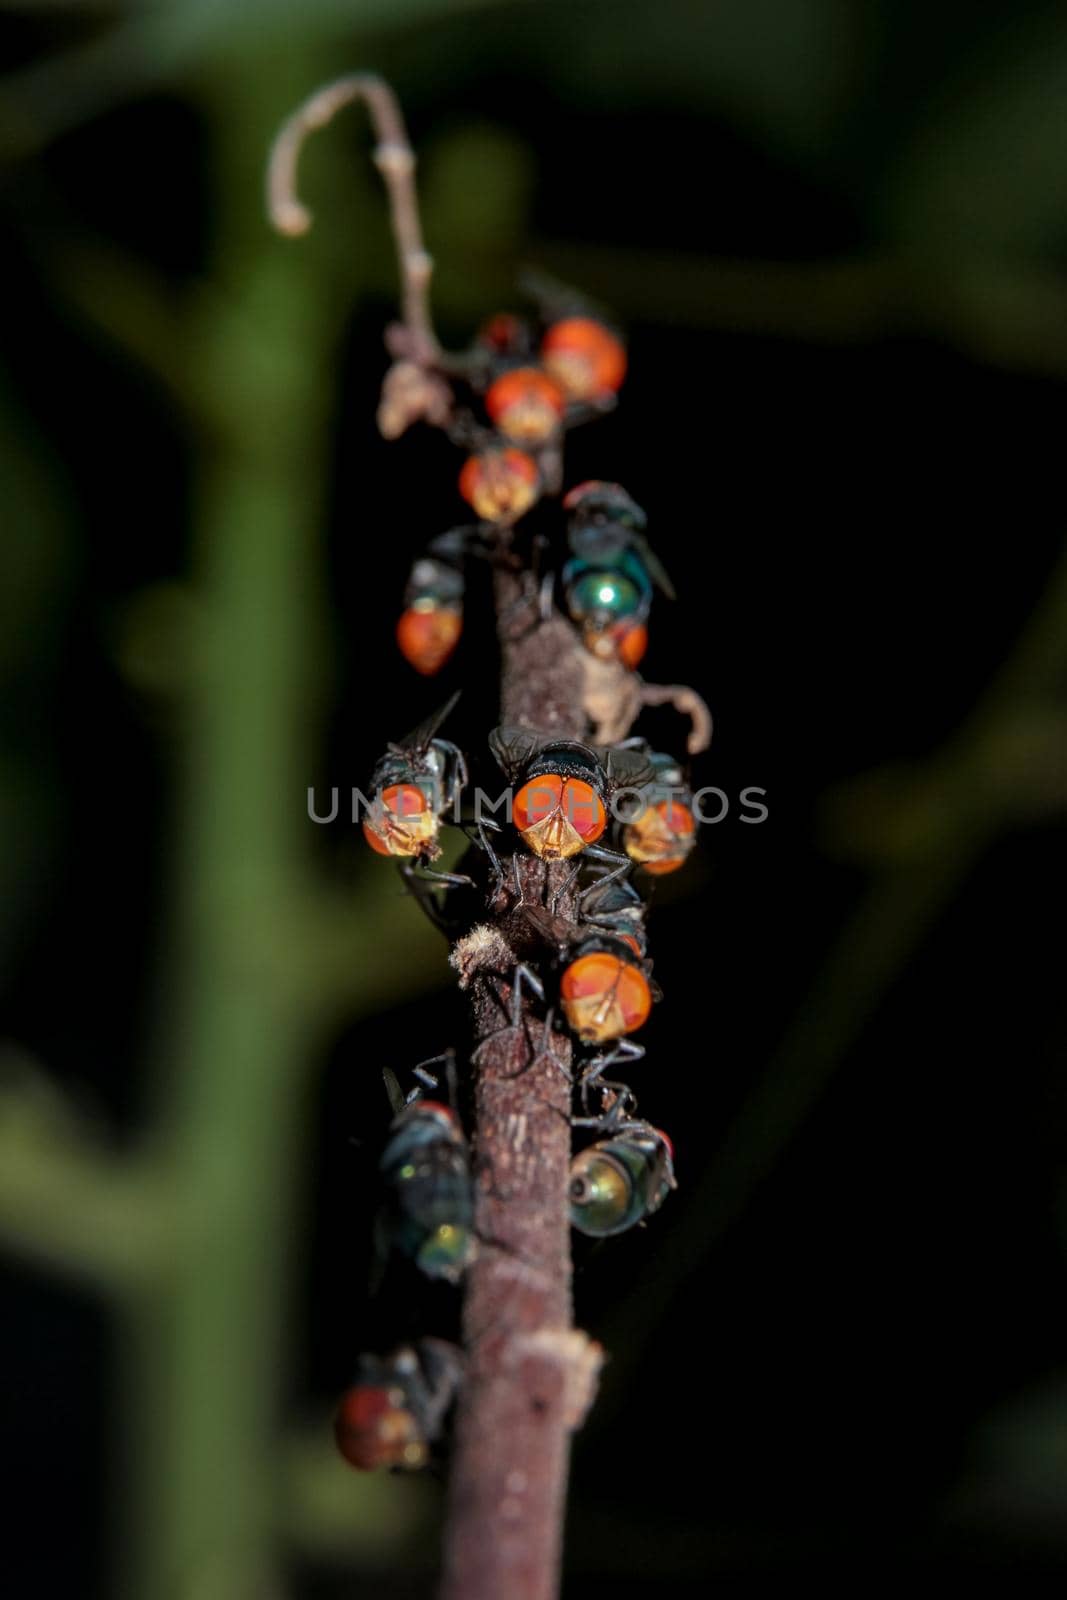 Some exotic flies on branch by RosaJay